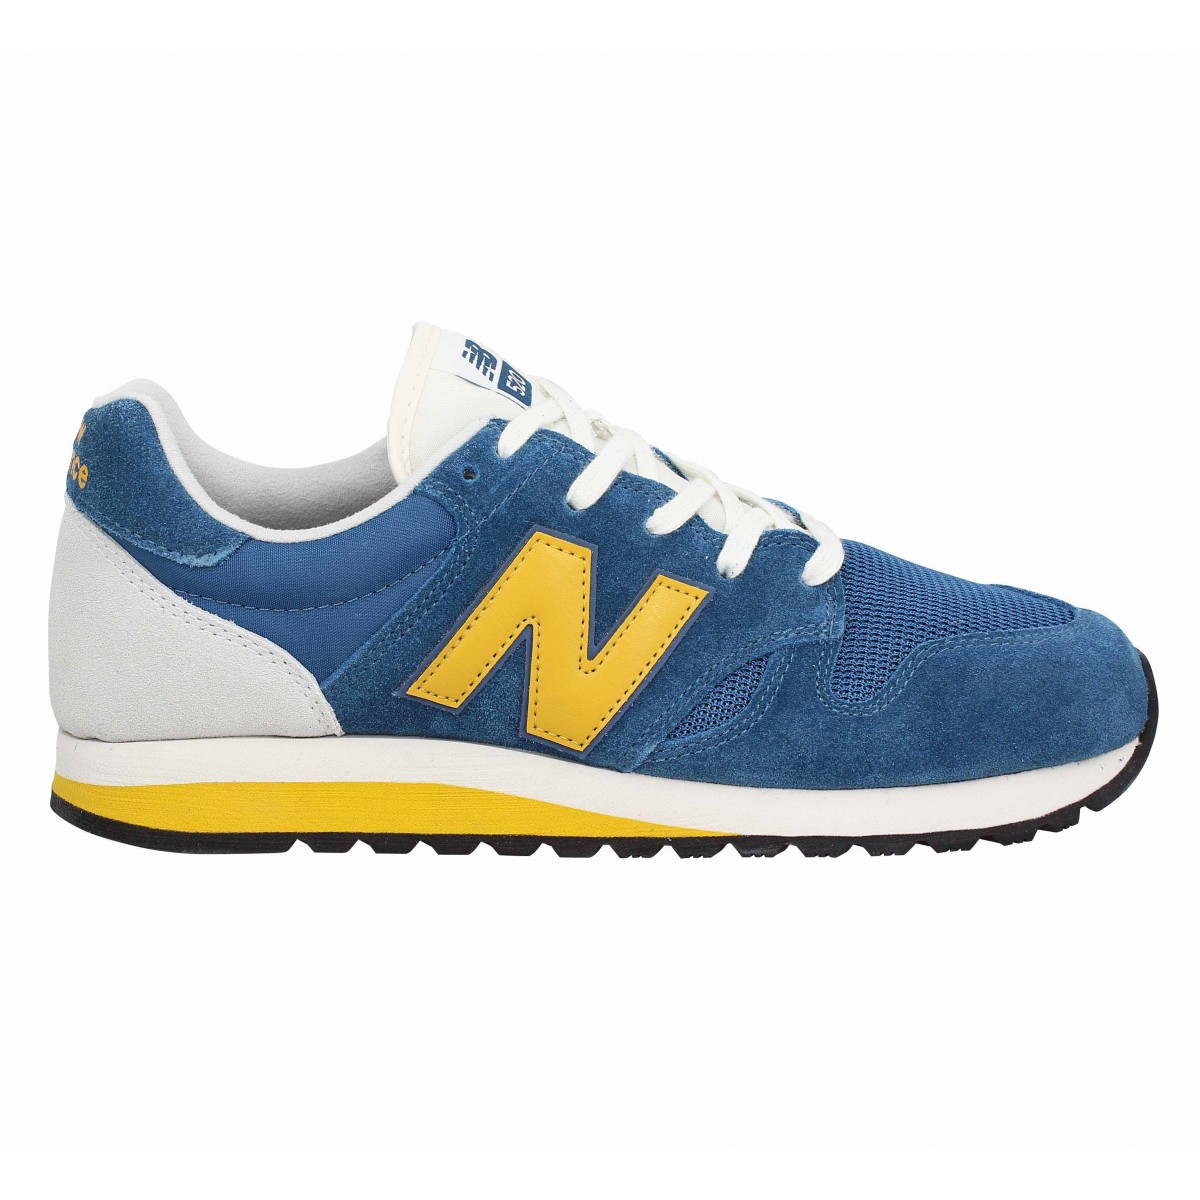 New balance 520 velours toile homme bleu homme | Fanny chaussures